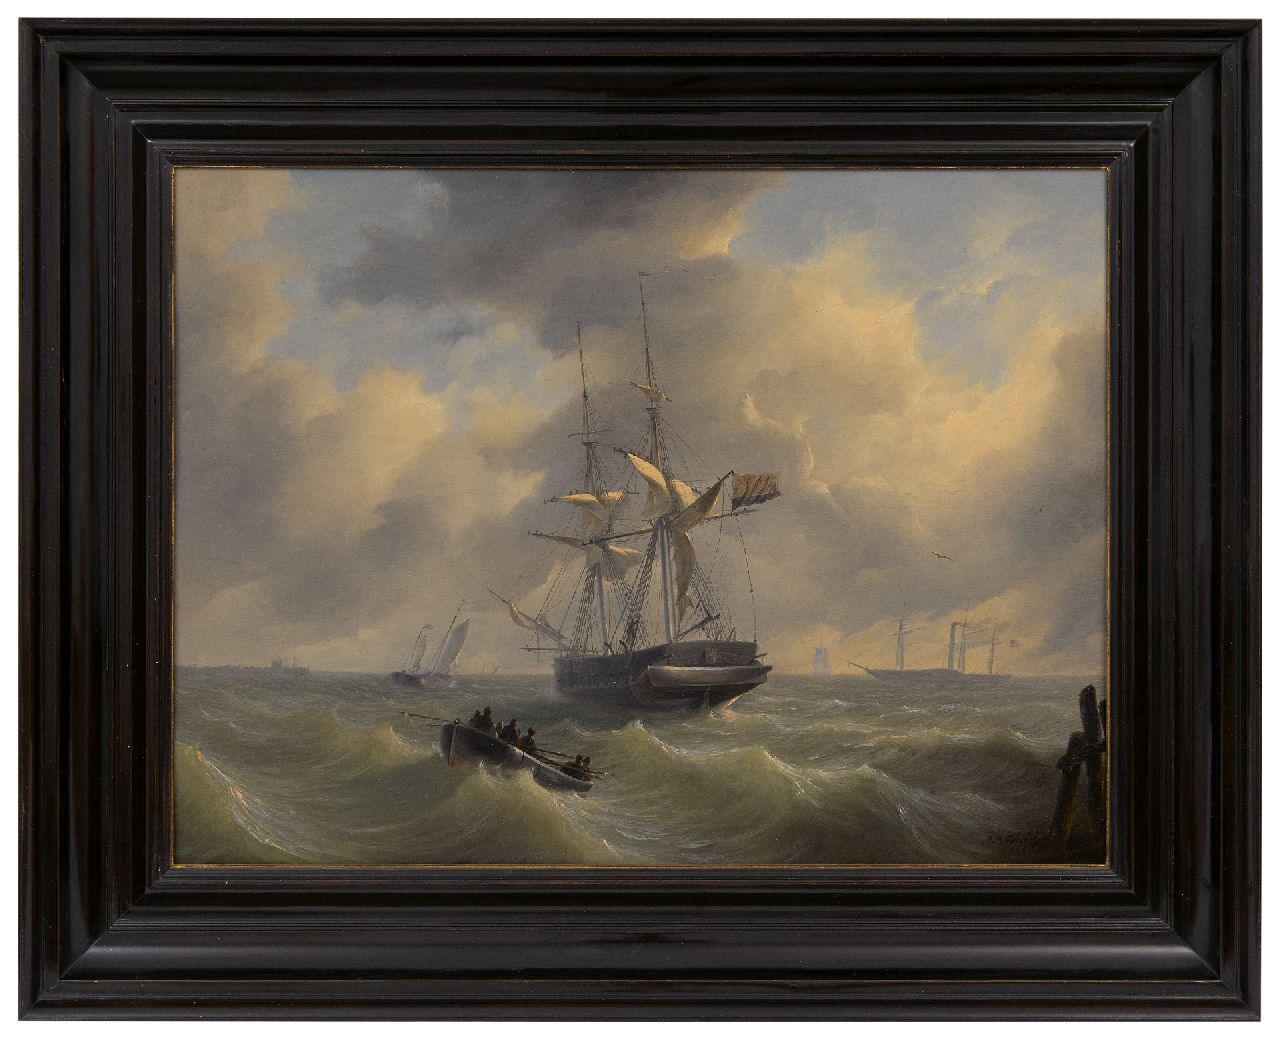 Schiedges P.P.  | Petrus Paulus Schiedges | Paintings offered for sale | Sailing ships on a choppy sea, oil on panel 38.7 x 51.8 cm, signed l.r. and dated 1835